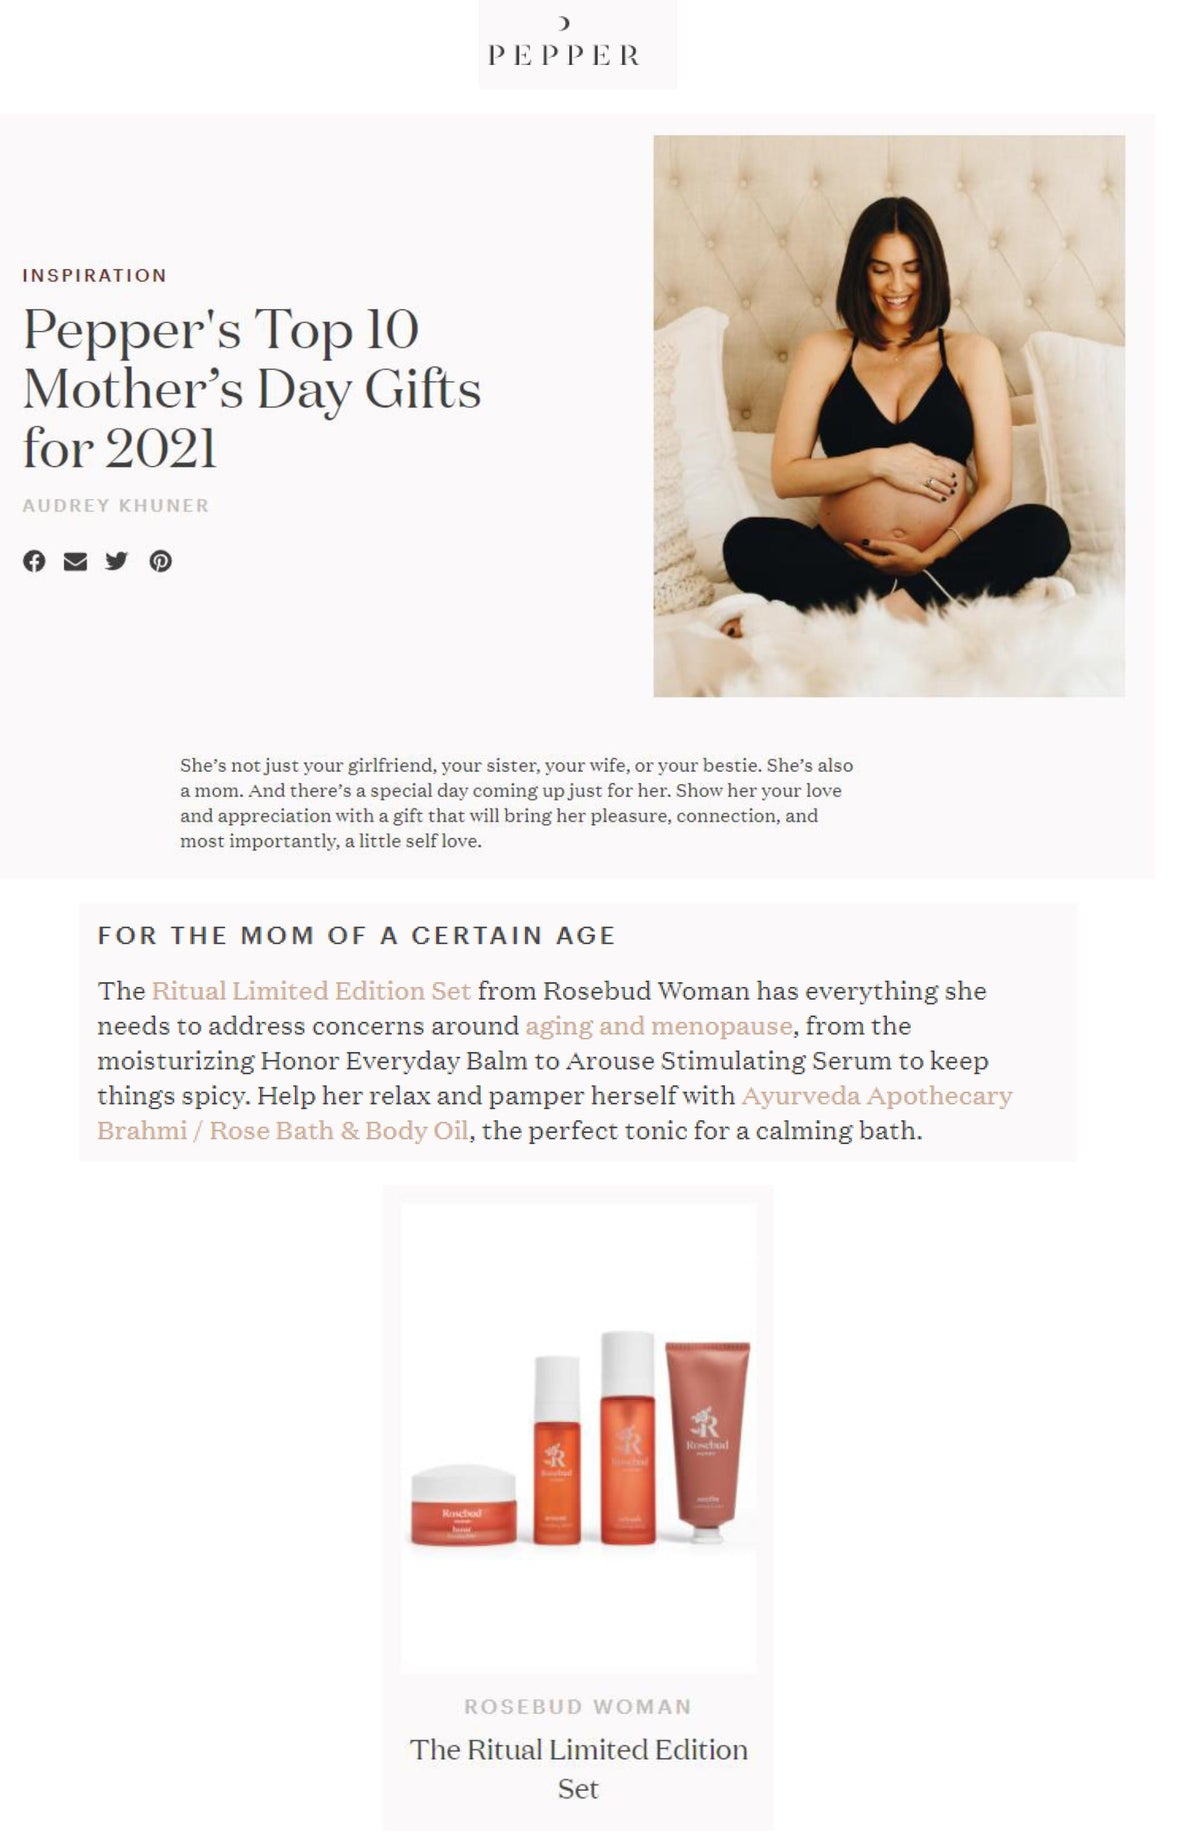 Pepper: Pepper's Top 10 Mother’s Day Gifts for 2021